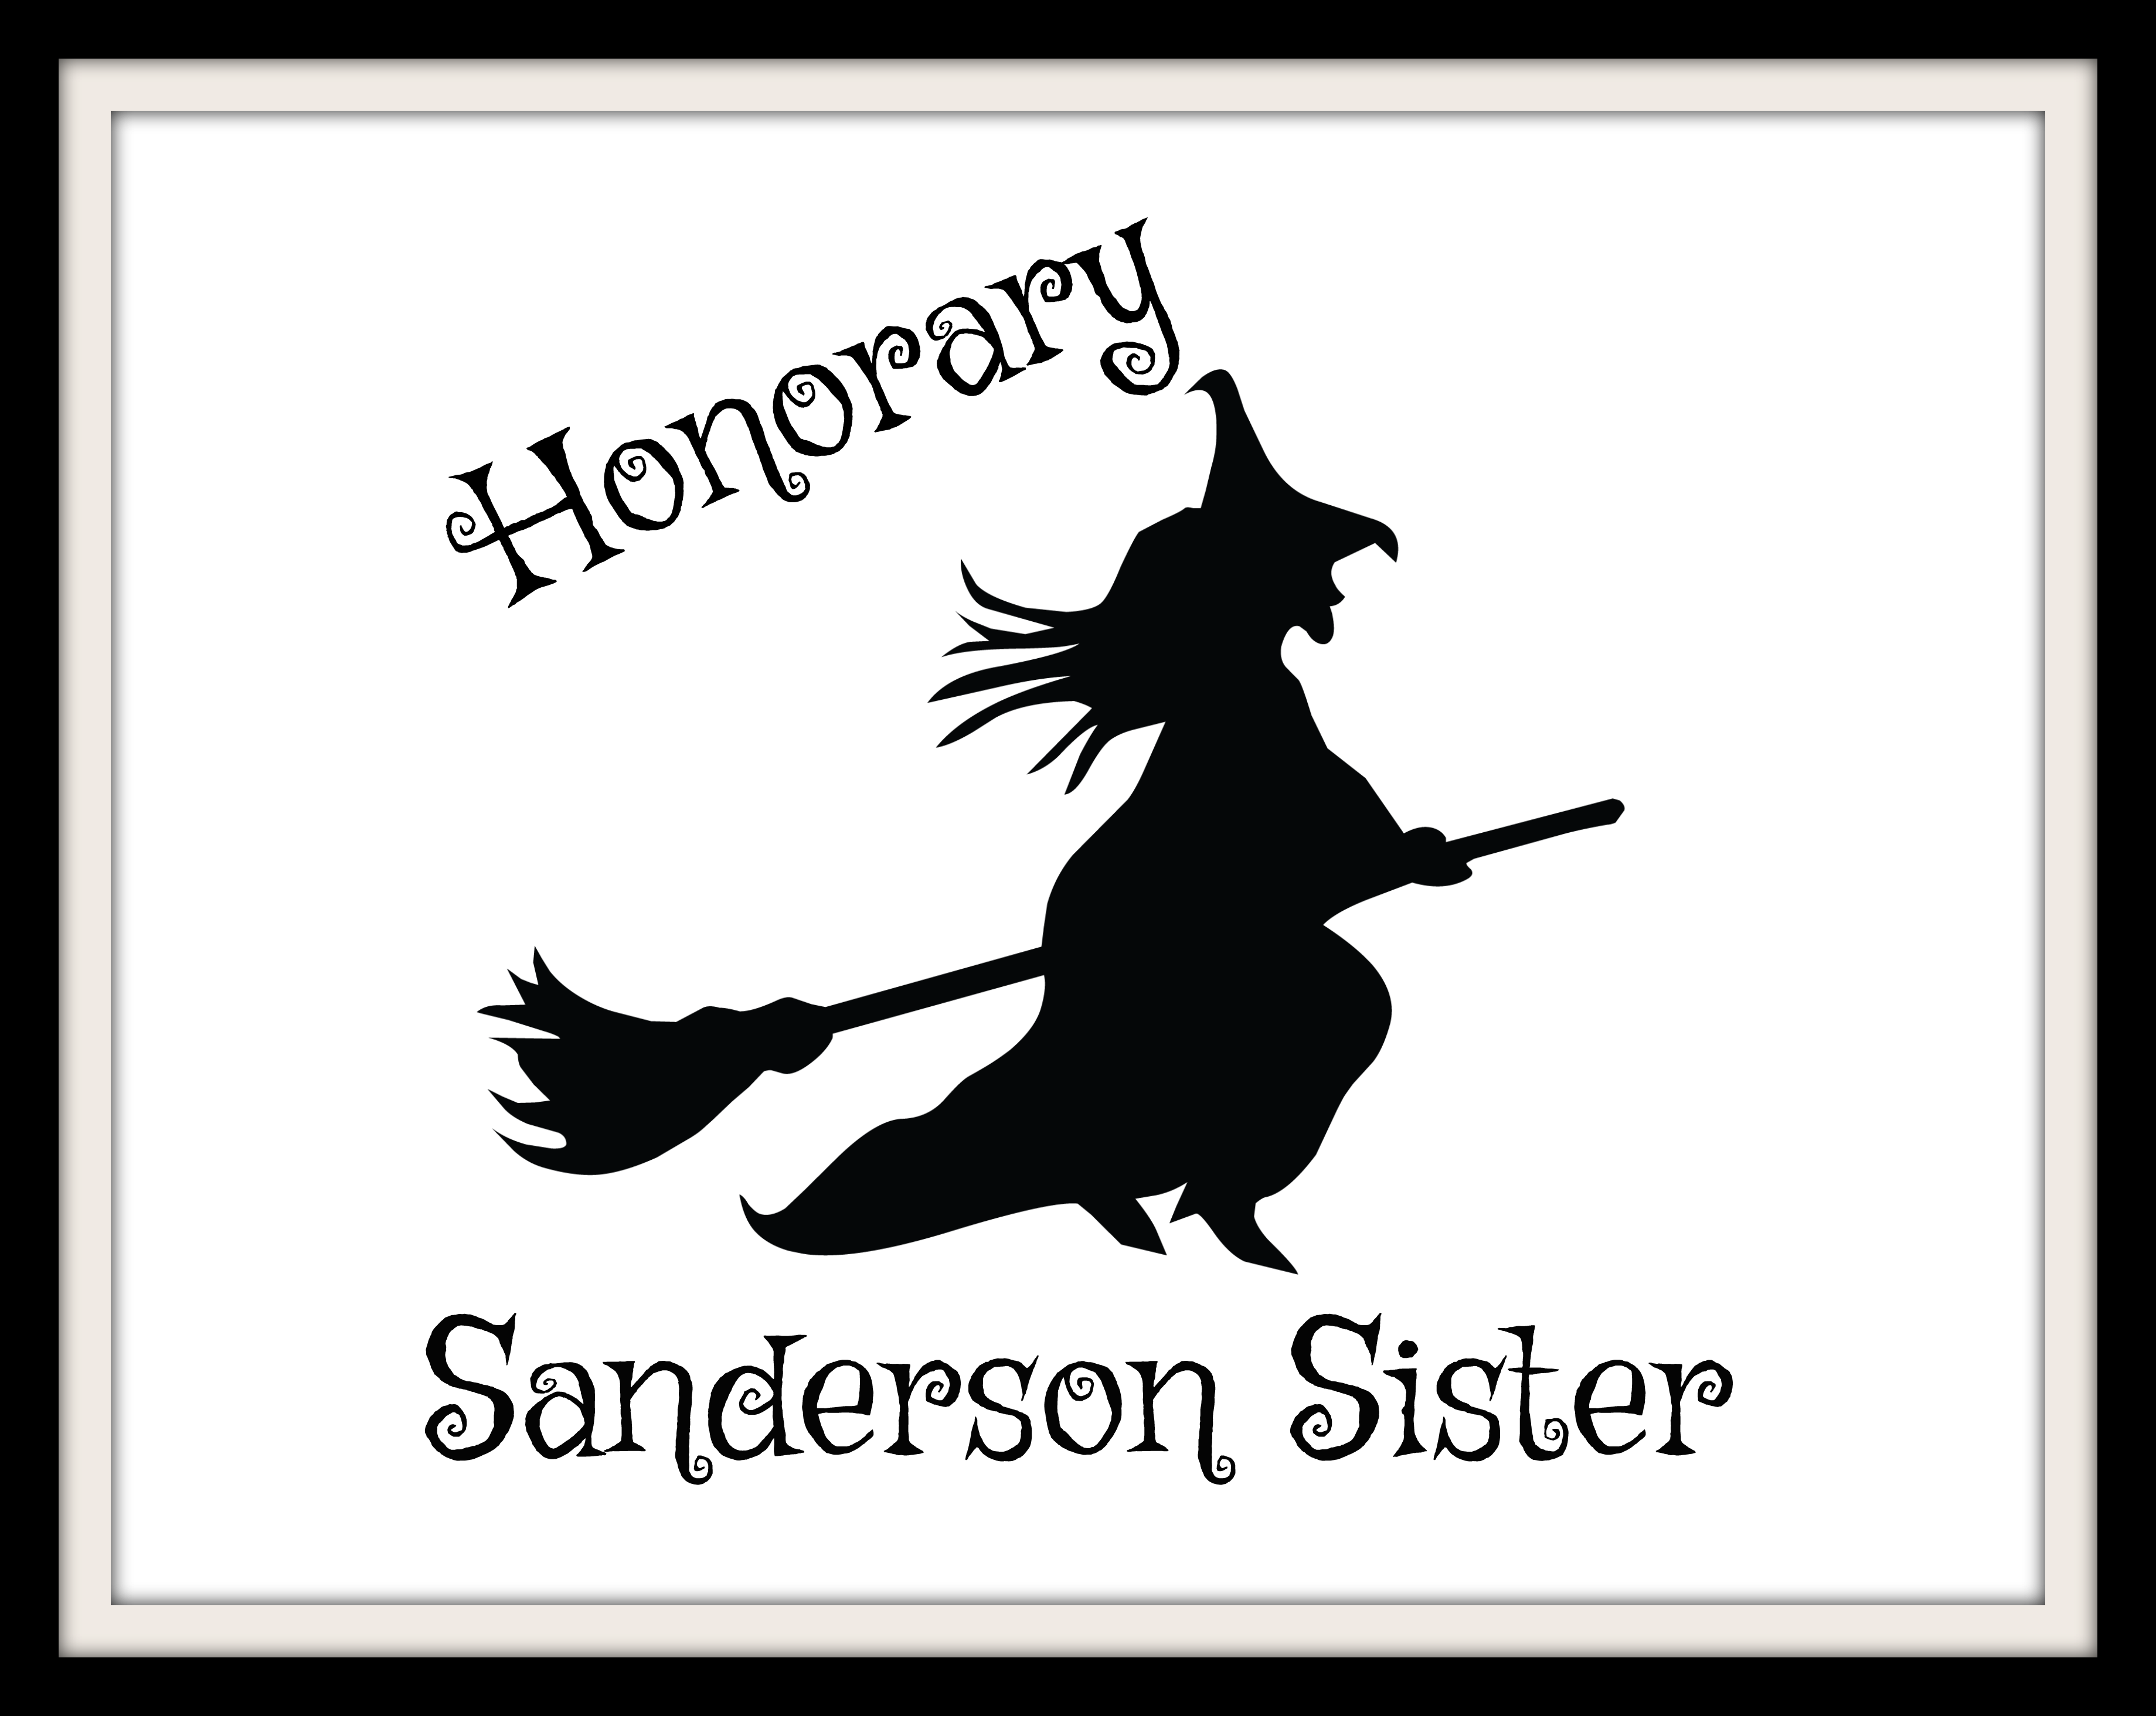 Sanderson sister wall art print with witch on broom silhouette.